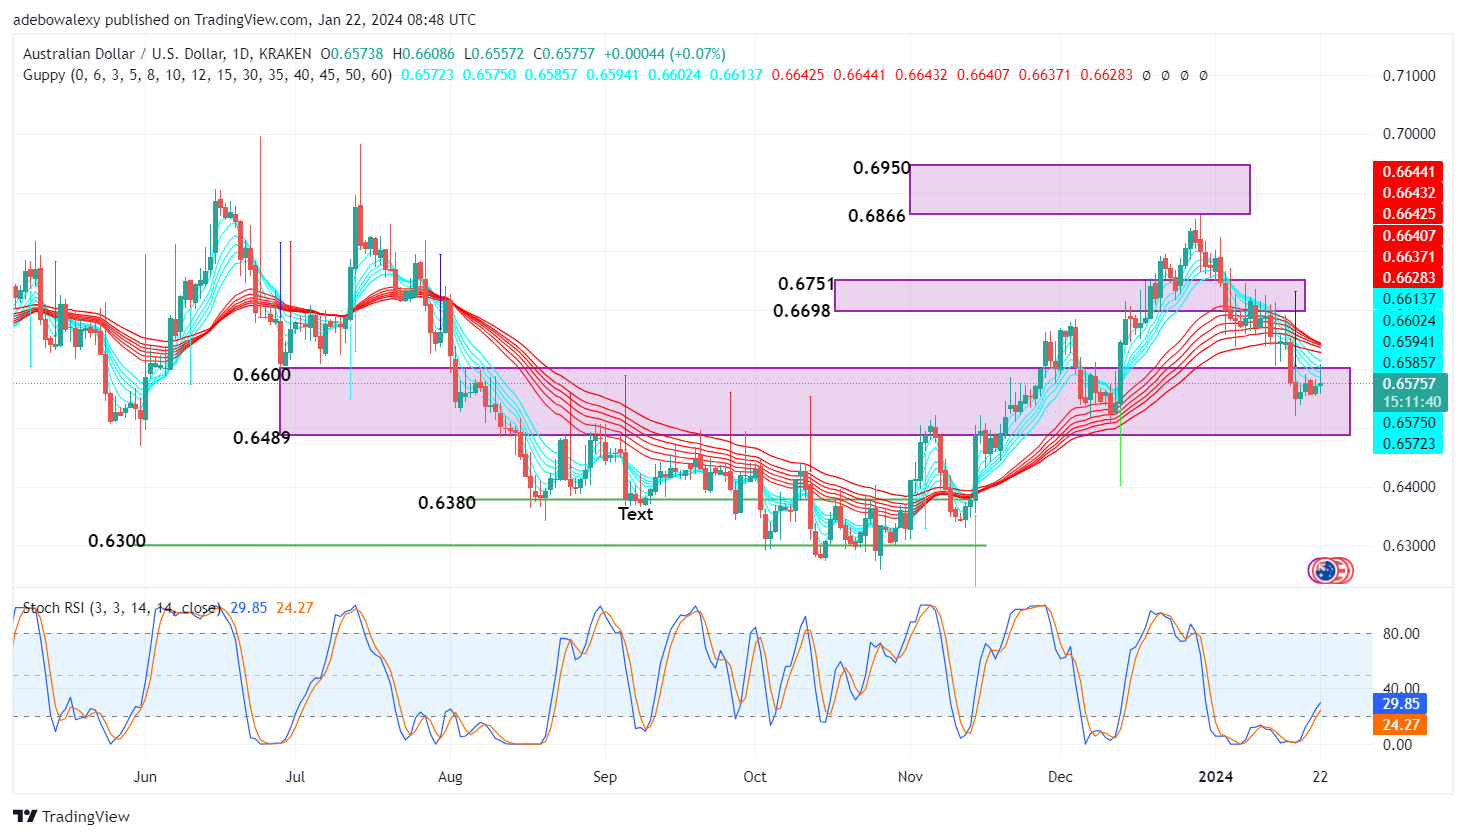 AUDUSD Bulls Are Being Limited The AUDUSD daily market has started the week to extend the previous week's rebound off support near the 0.6540 mark.